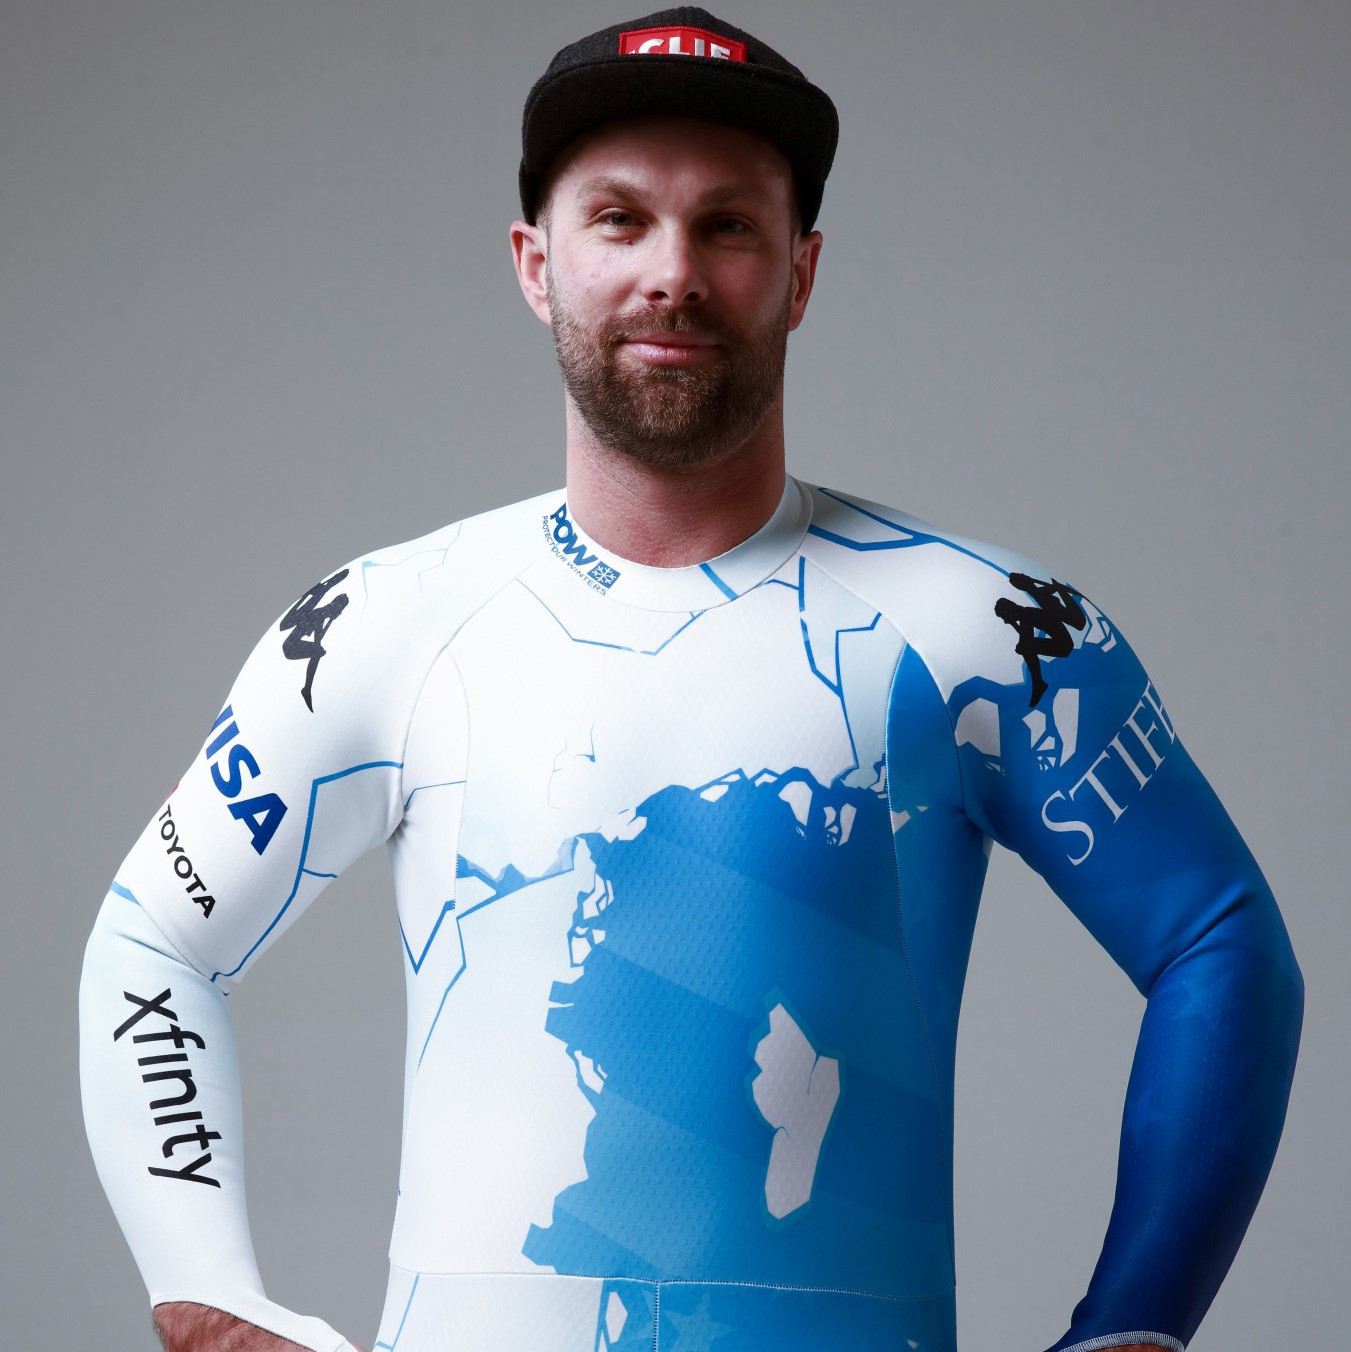 The new climate changing-themed suit, featuring chunks of ice scattering into the ocean to represent growing climate issues ©US Ski and Snowboard